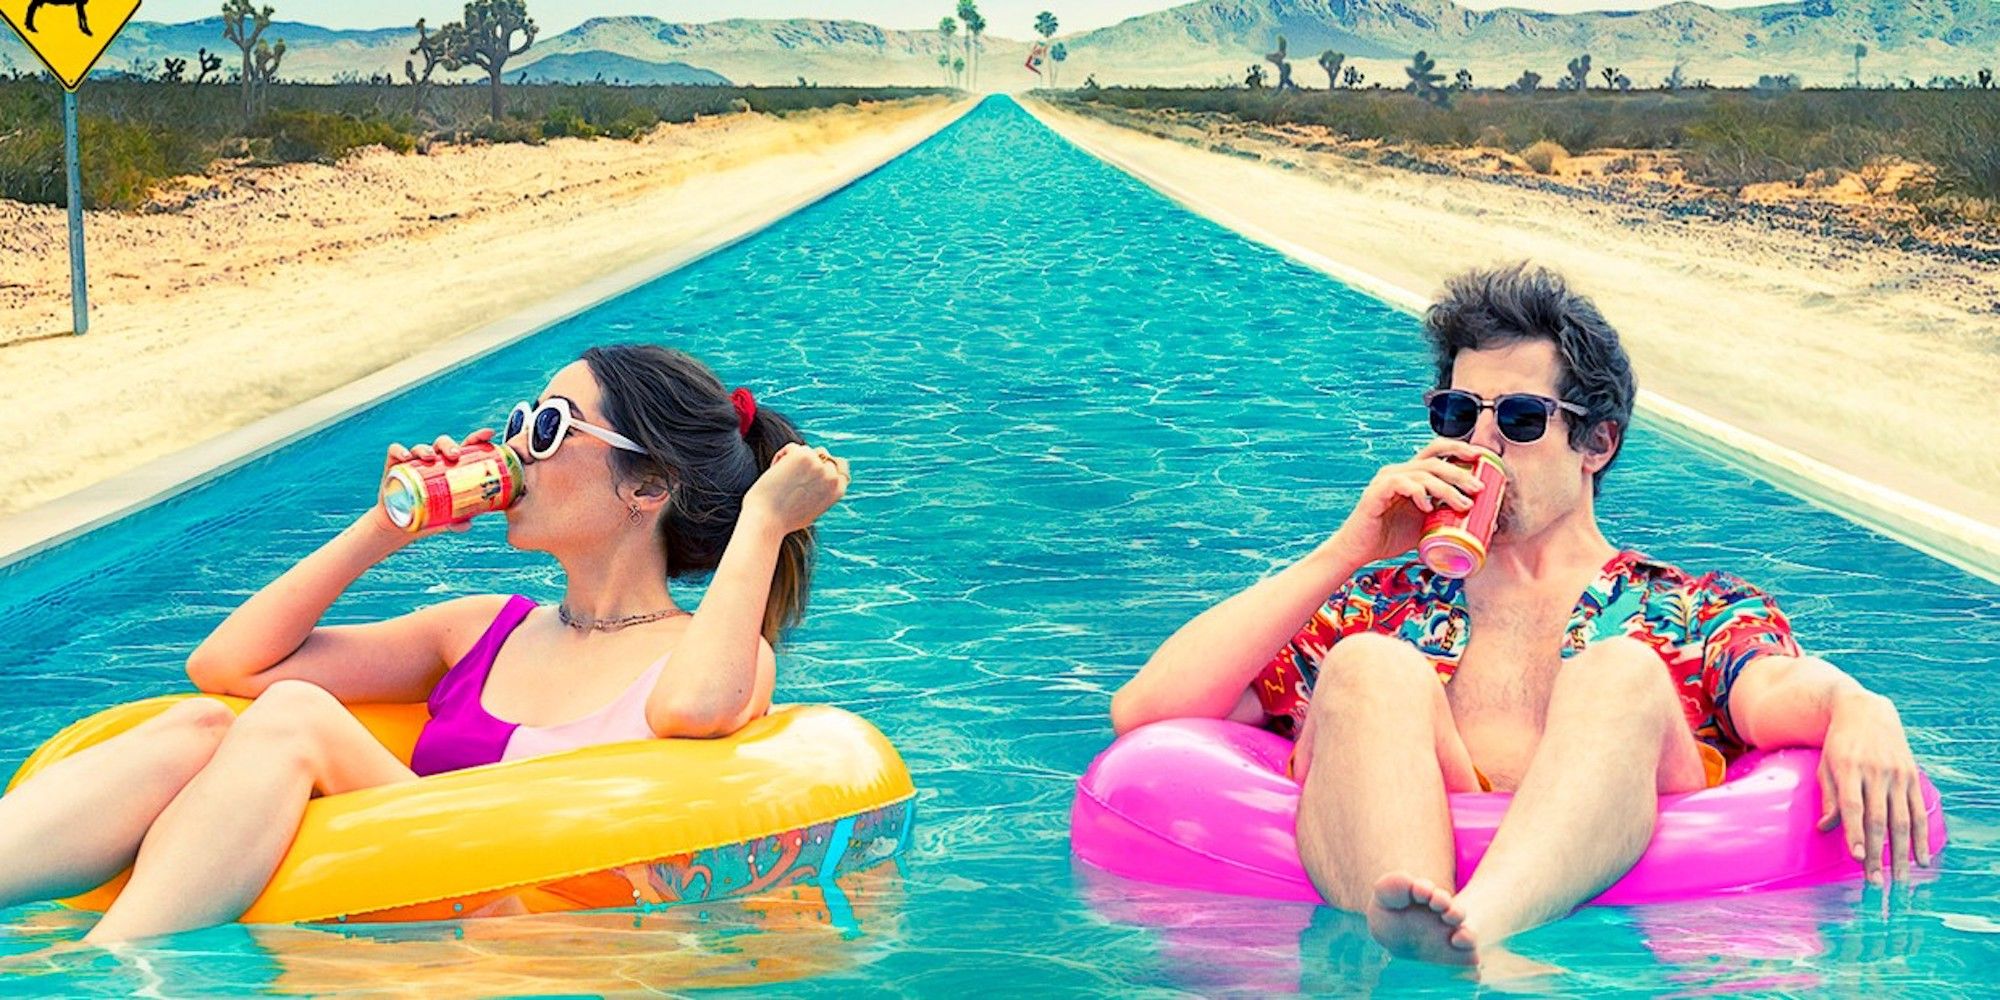 Sarah and Nyles drink beer in the pool in Palm Springs